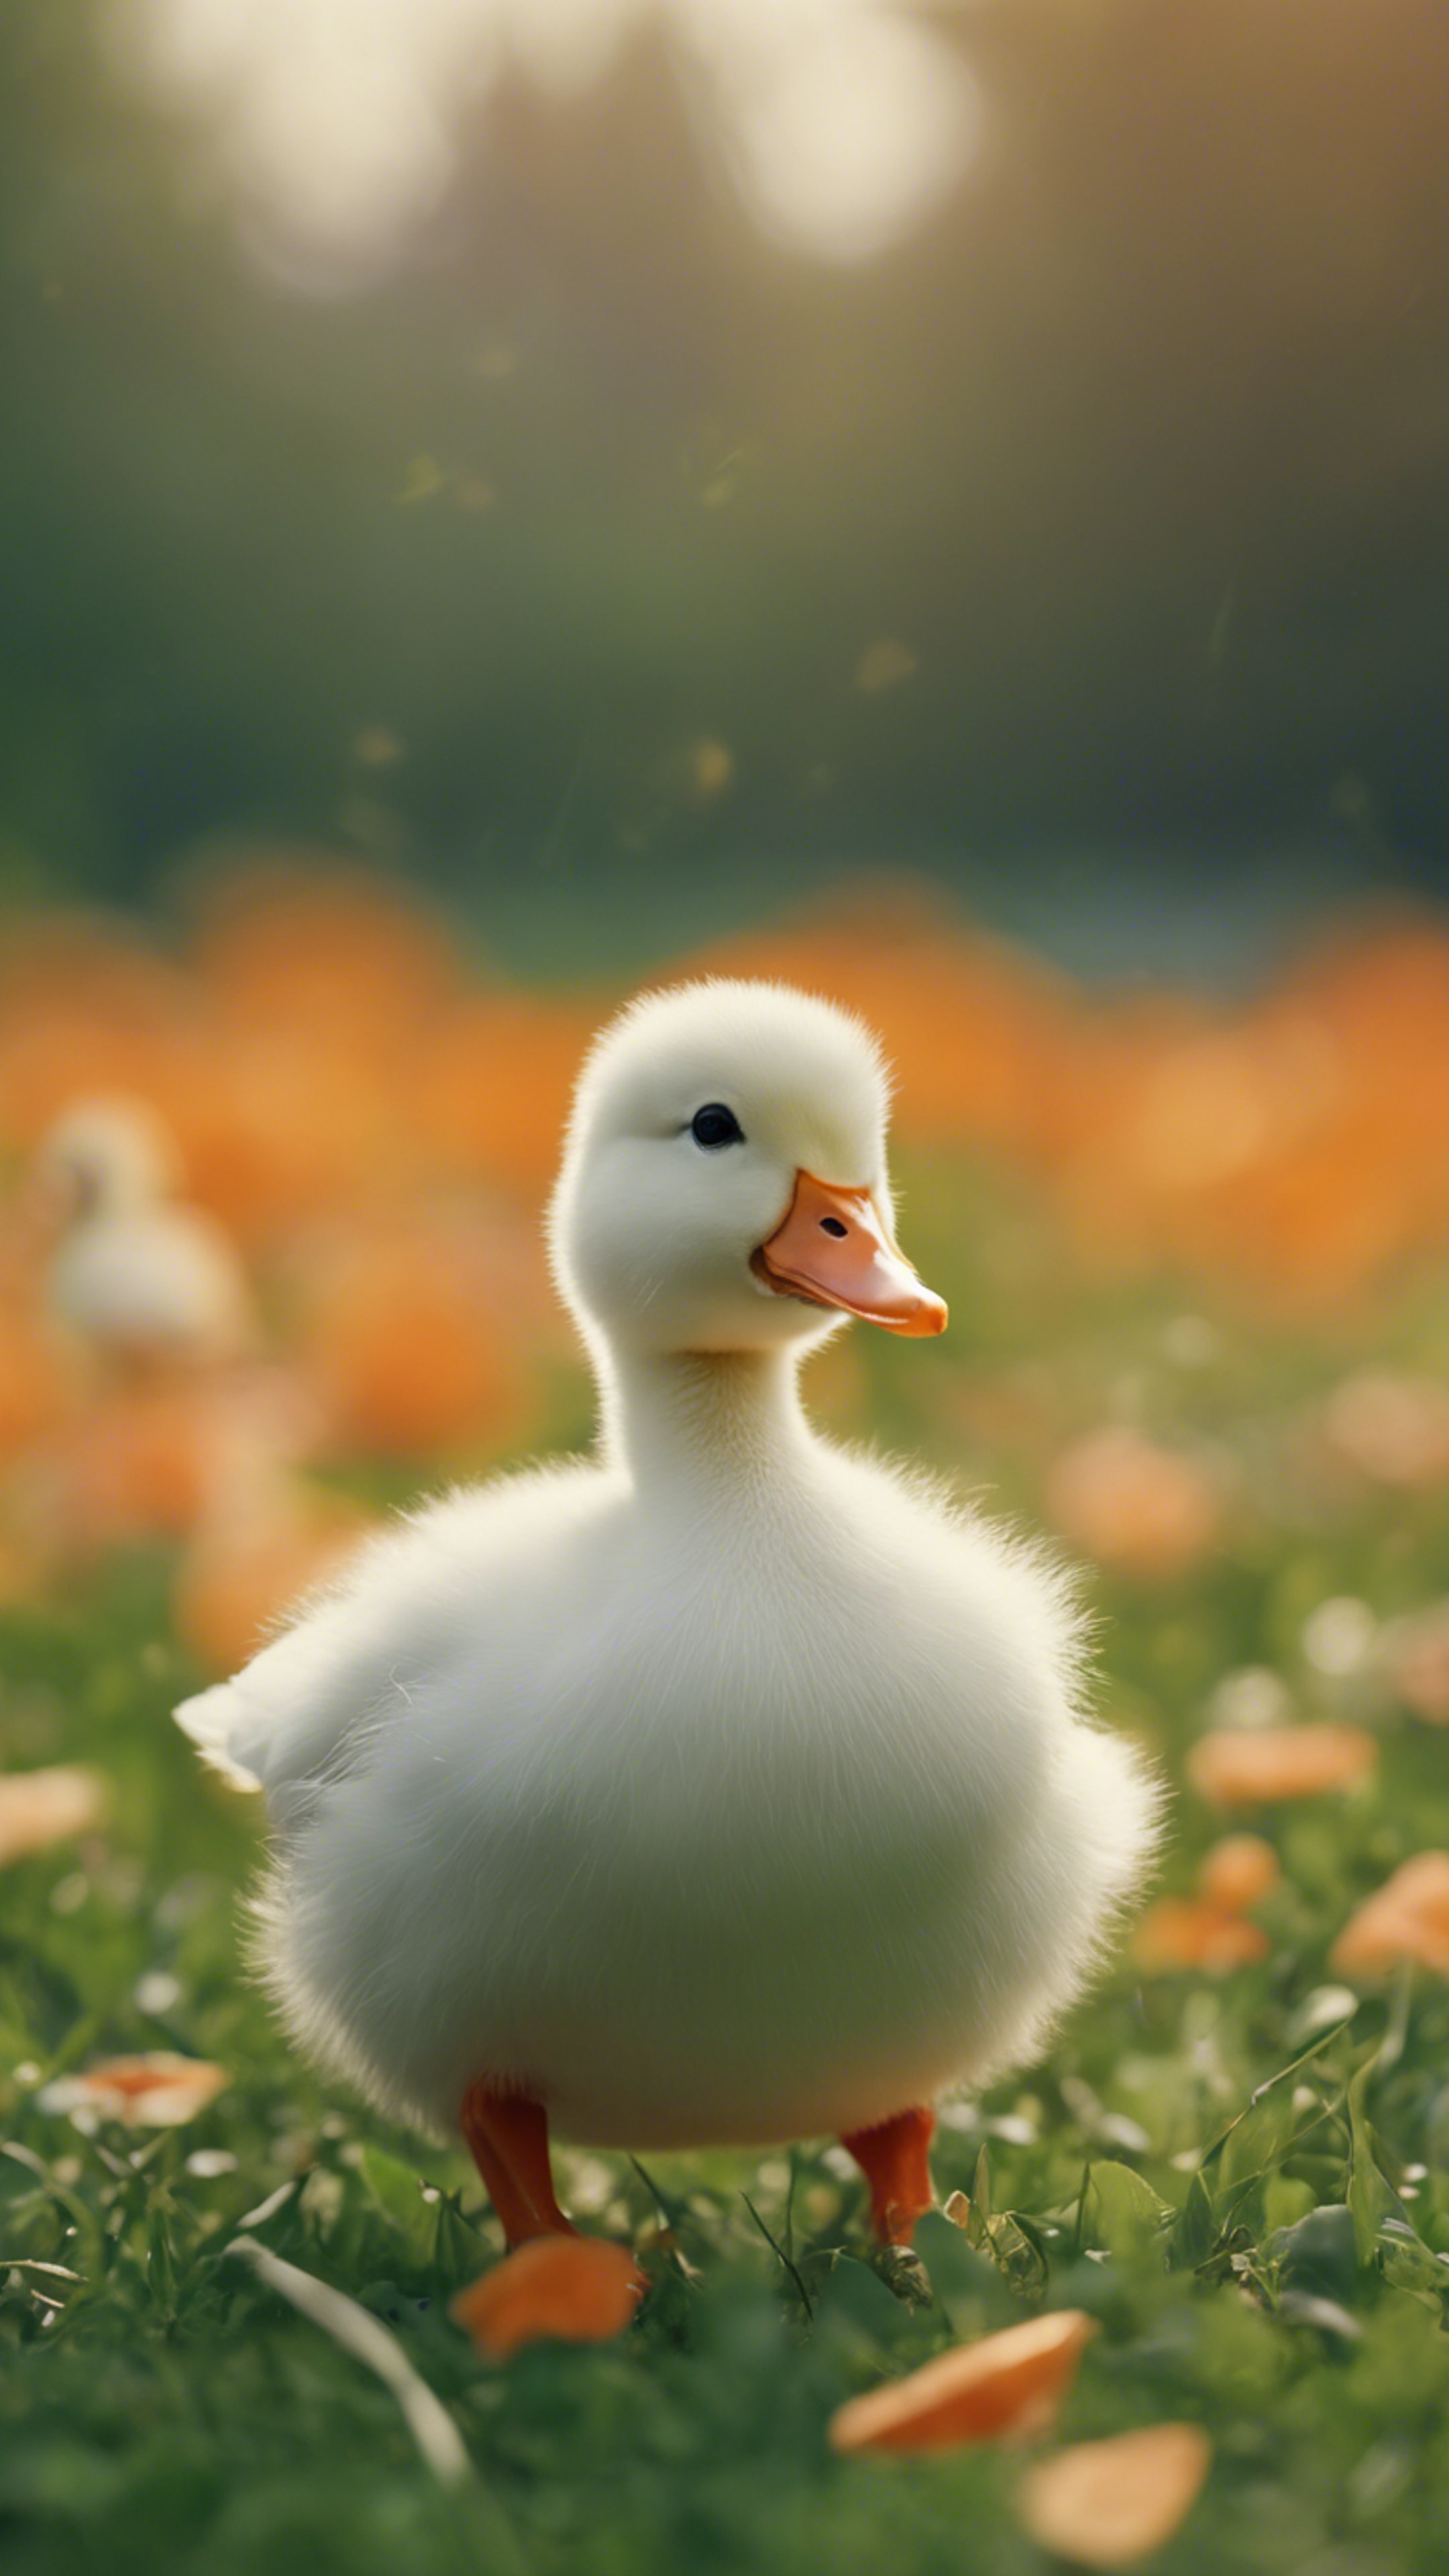 An adorable fluffy white duck with a bright orange bill is waddling happily across a green meadow. Tapet[c976b0c80c1040dead0f]